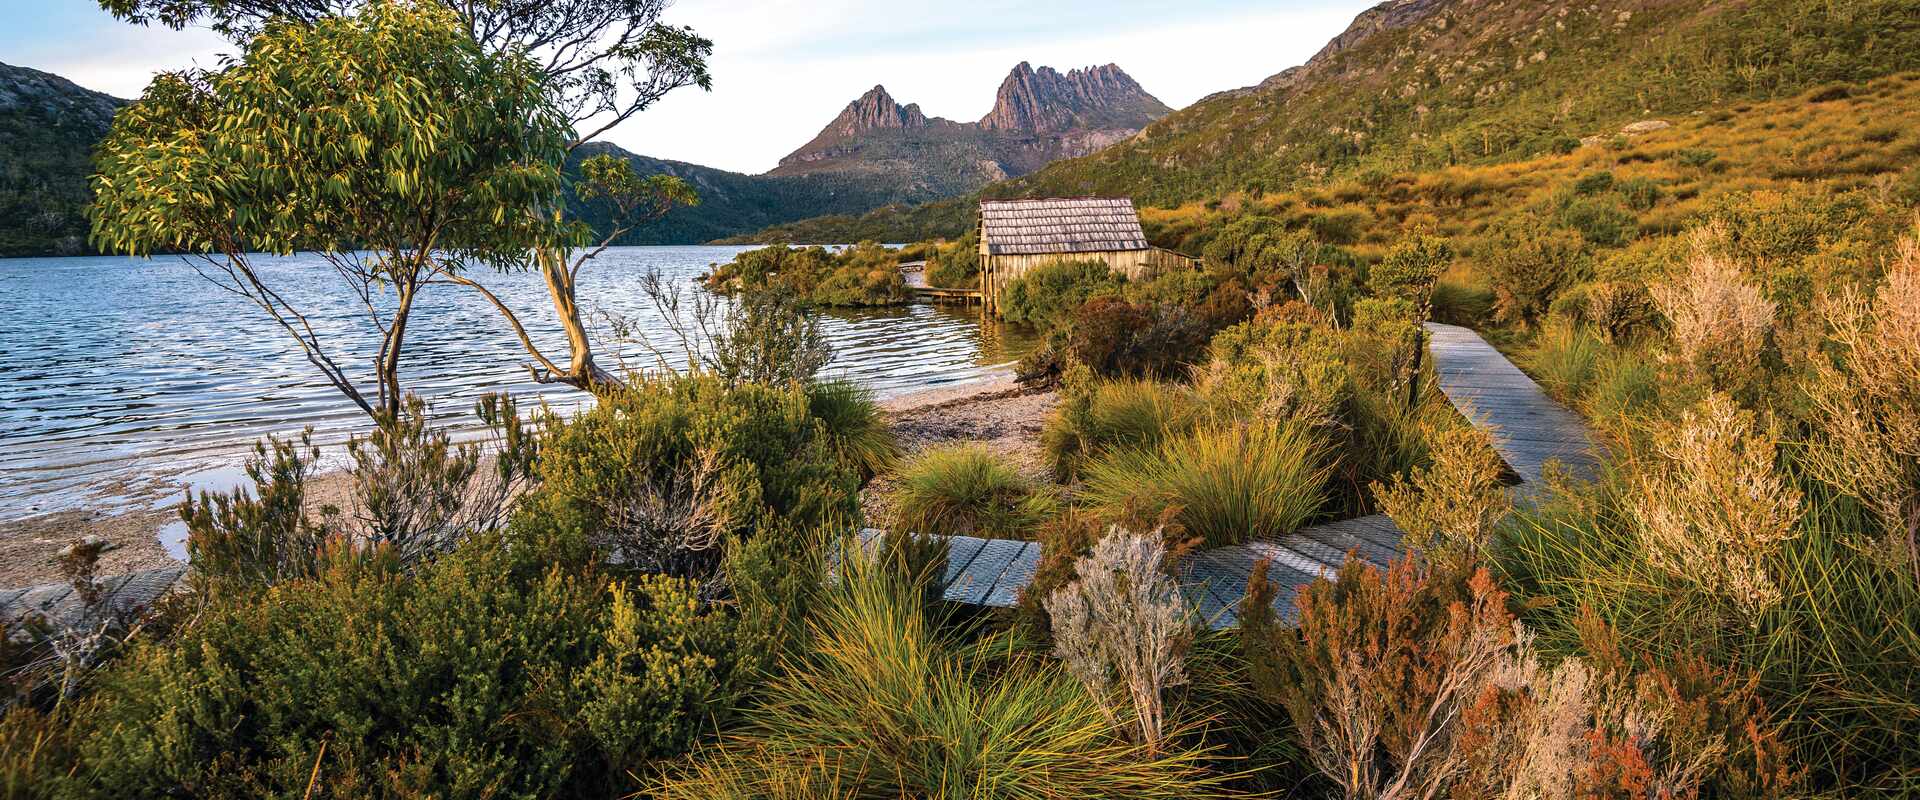 Natural wilderness surrounding Dove Lake in Tasmania with Cradle Mountain in the background